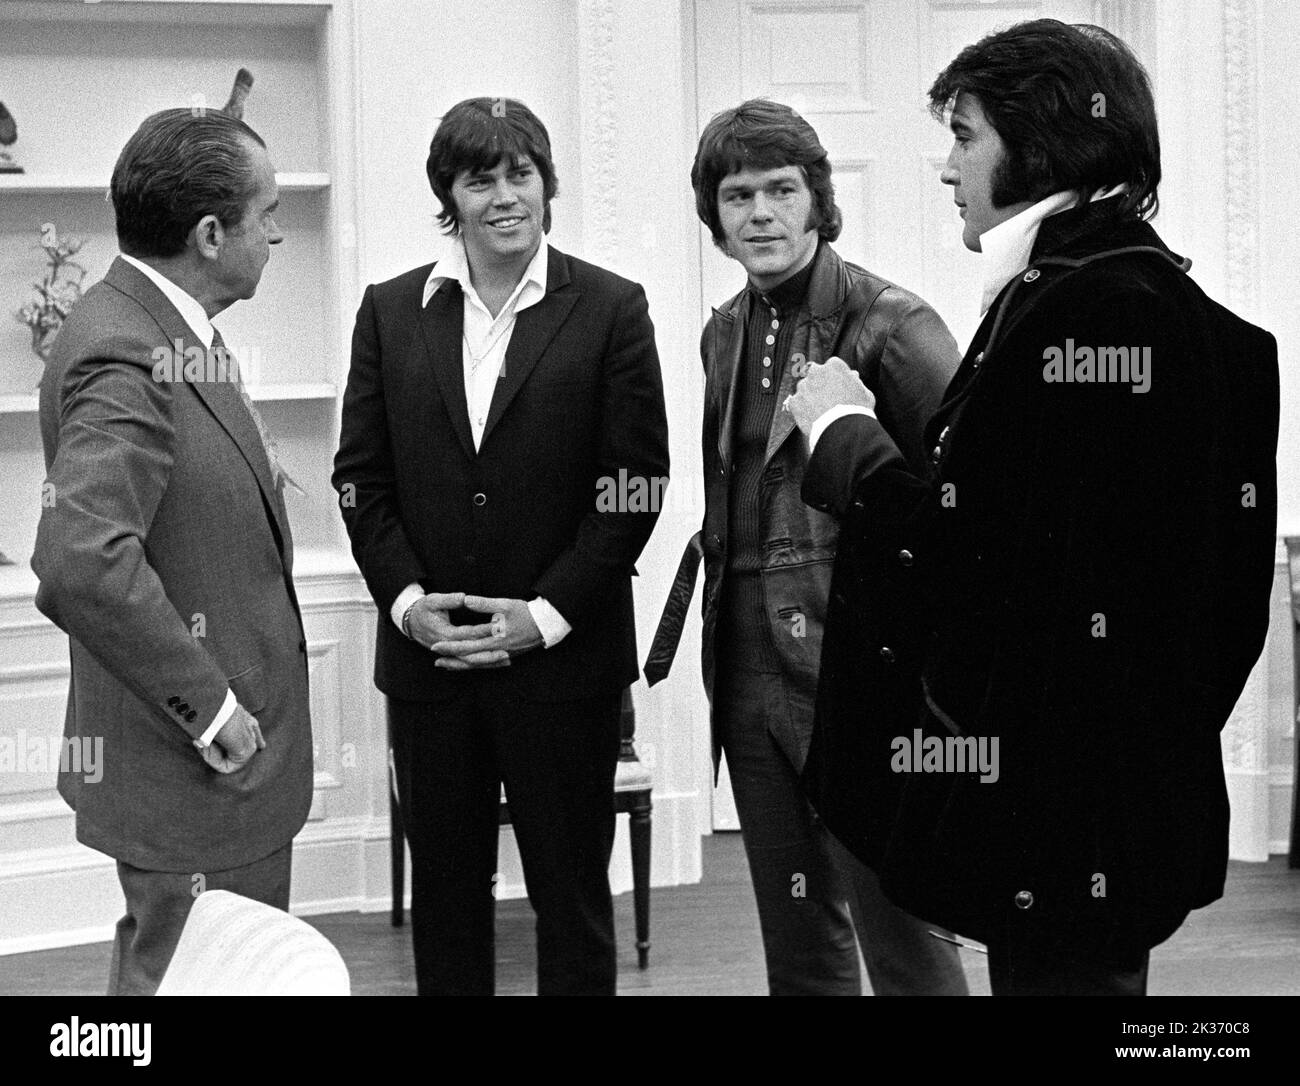 President Richard Nixon, Sonny West, Jerry Schilling and Elvis Presley. The White House Oval Office Dec 21 1970 Stock Photo